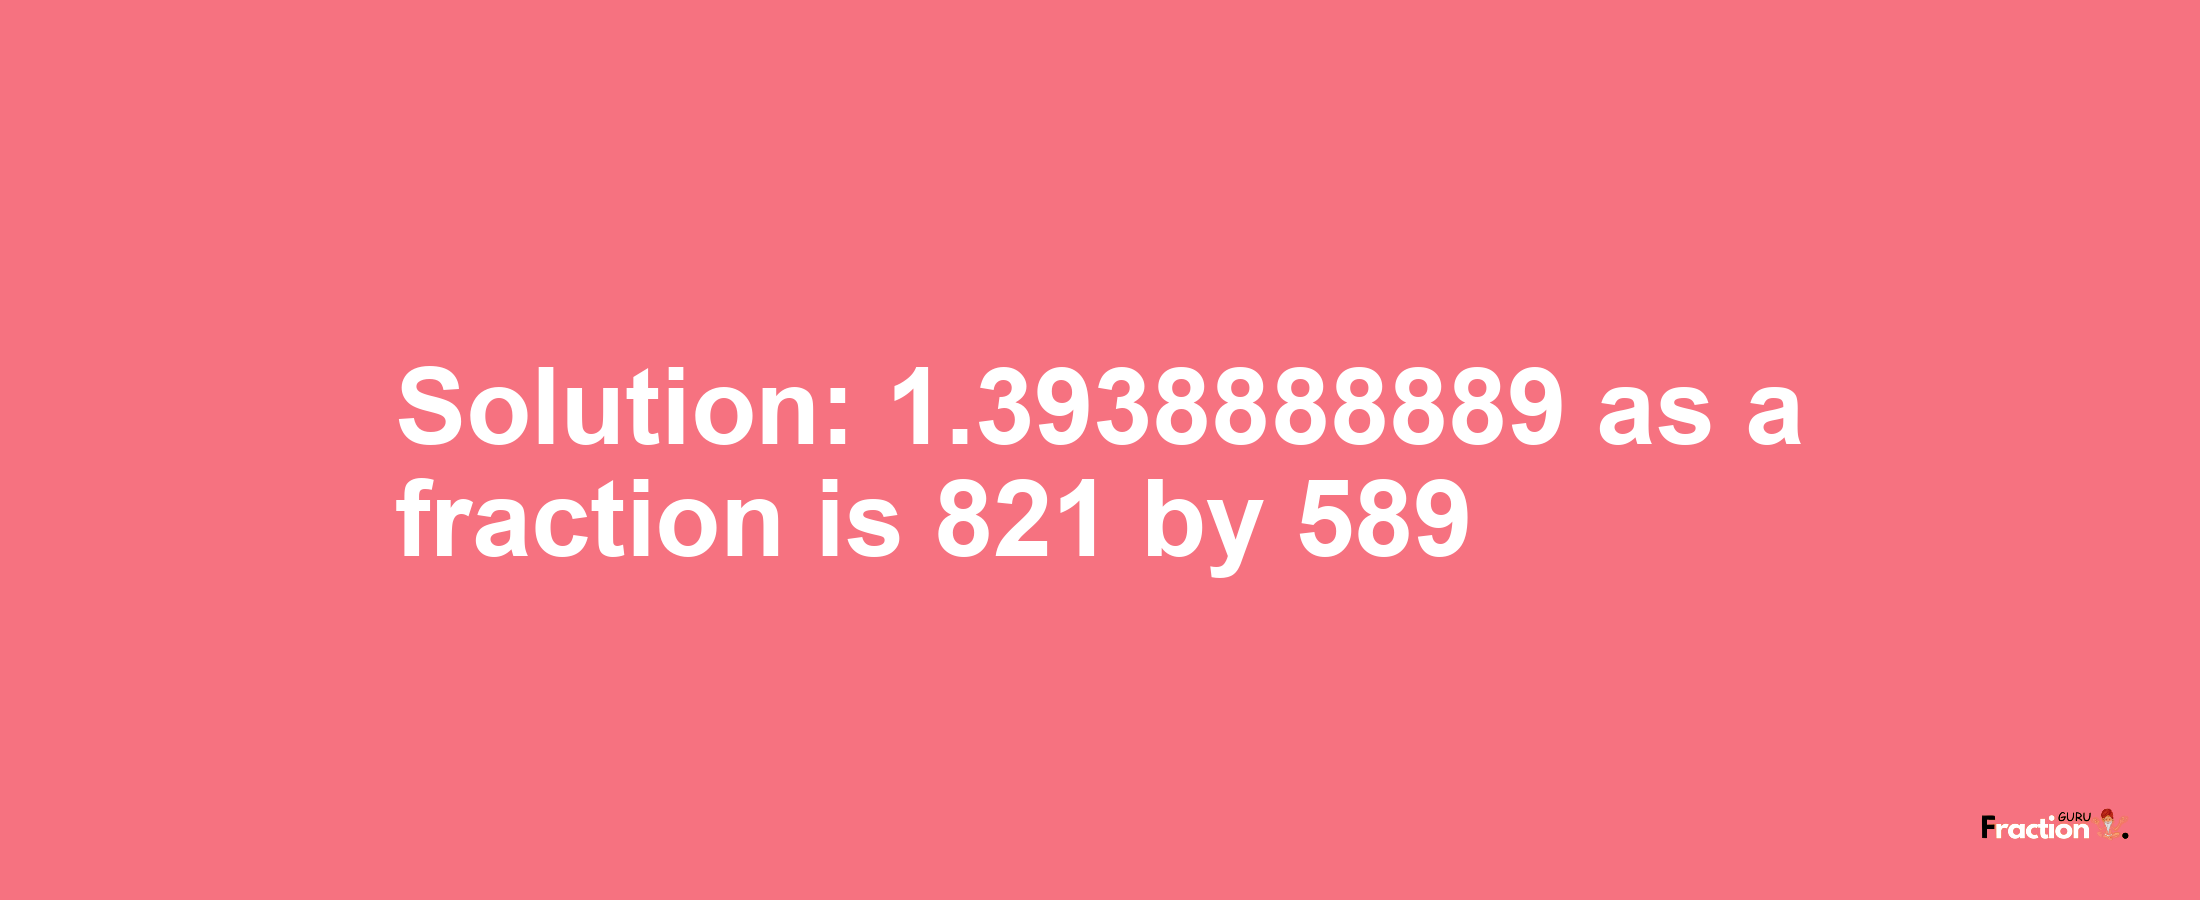 Solution:1.3938888889 as a fraction is 821/589